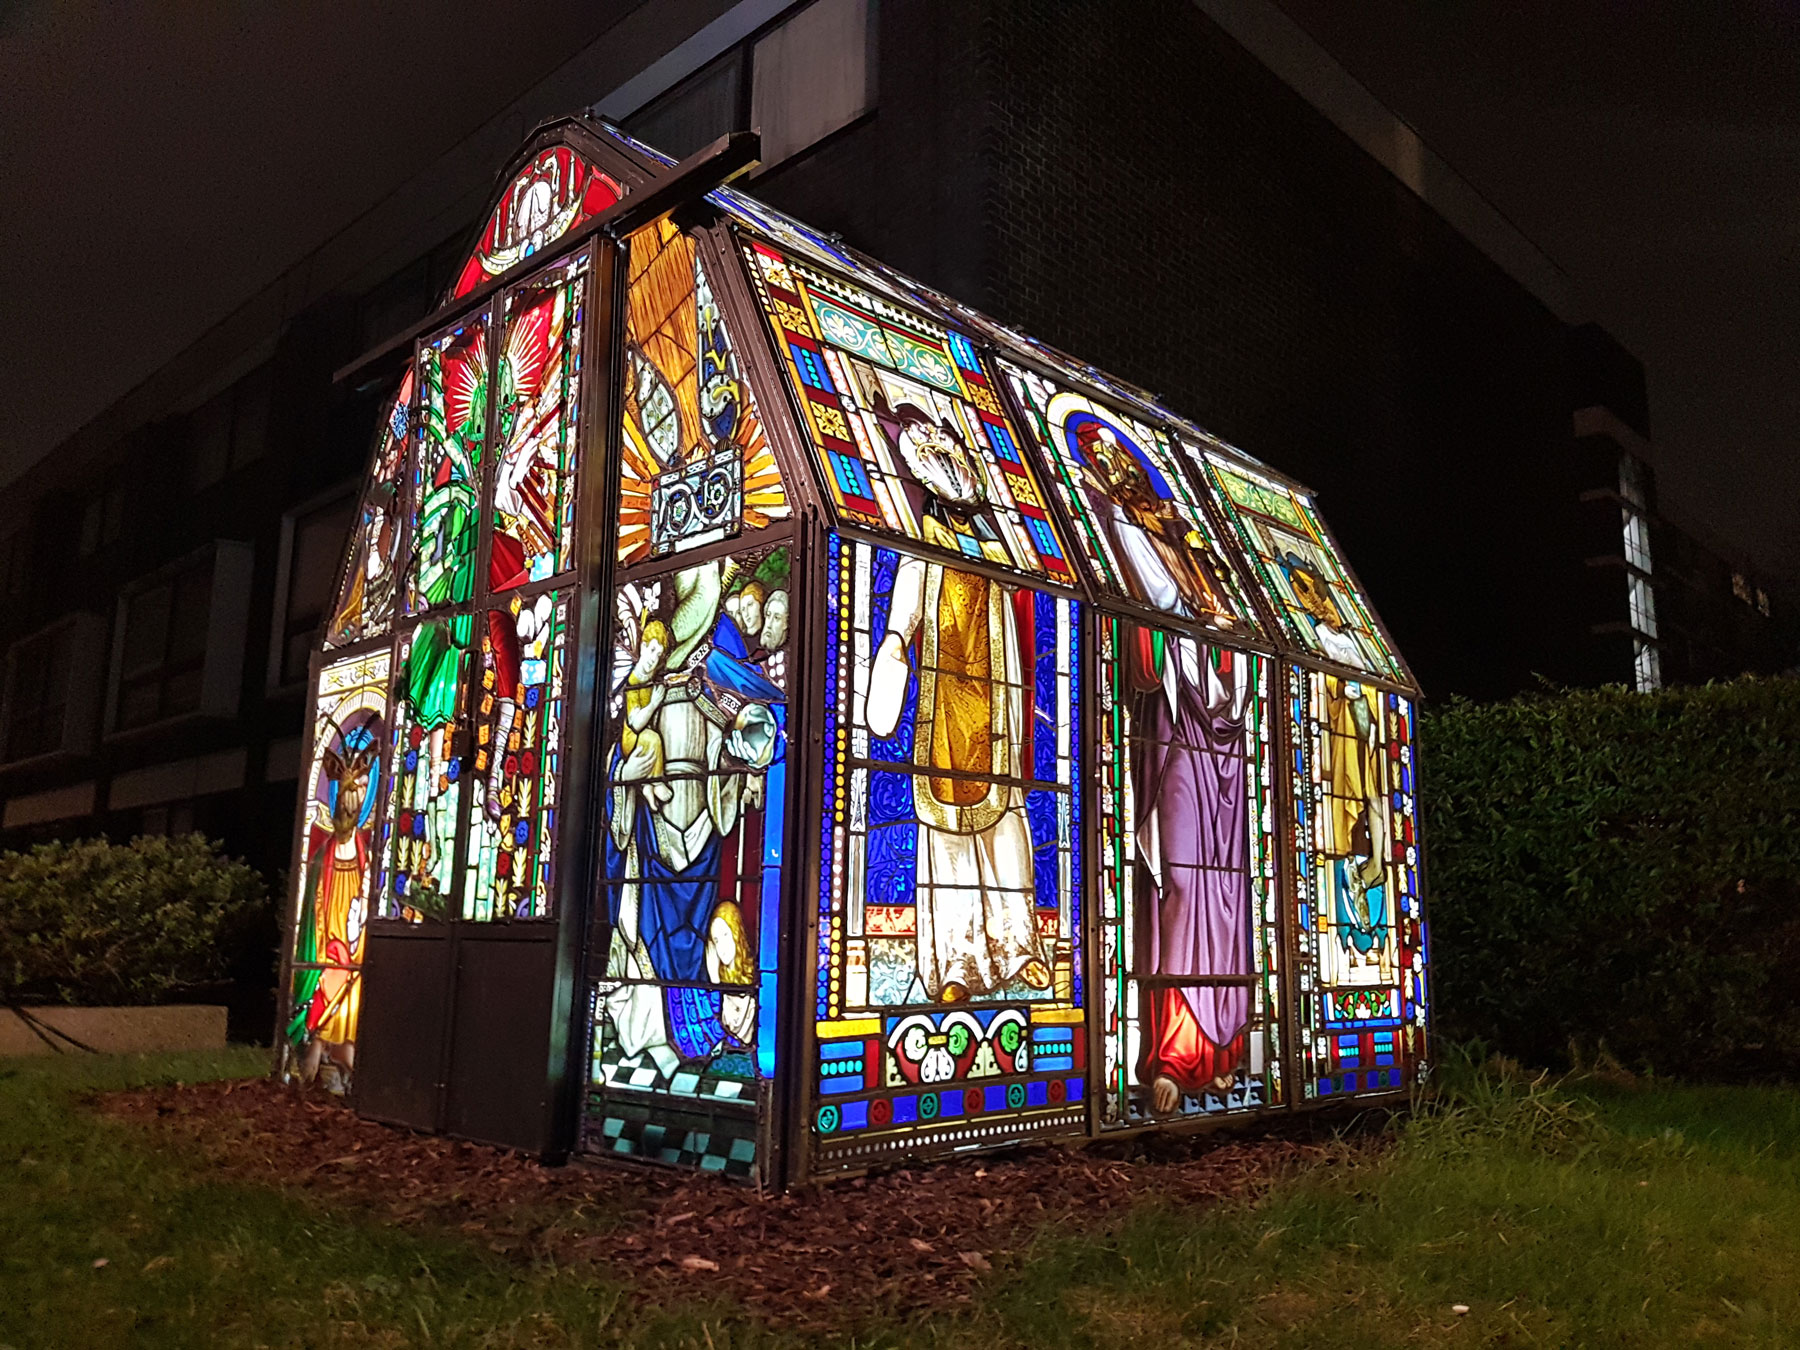 A Glowing Greenhouse Of Distorted Stained Glass